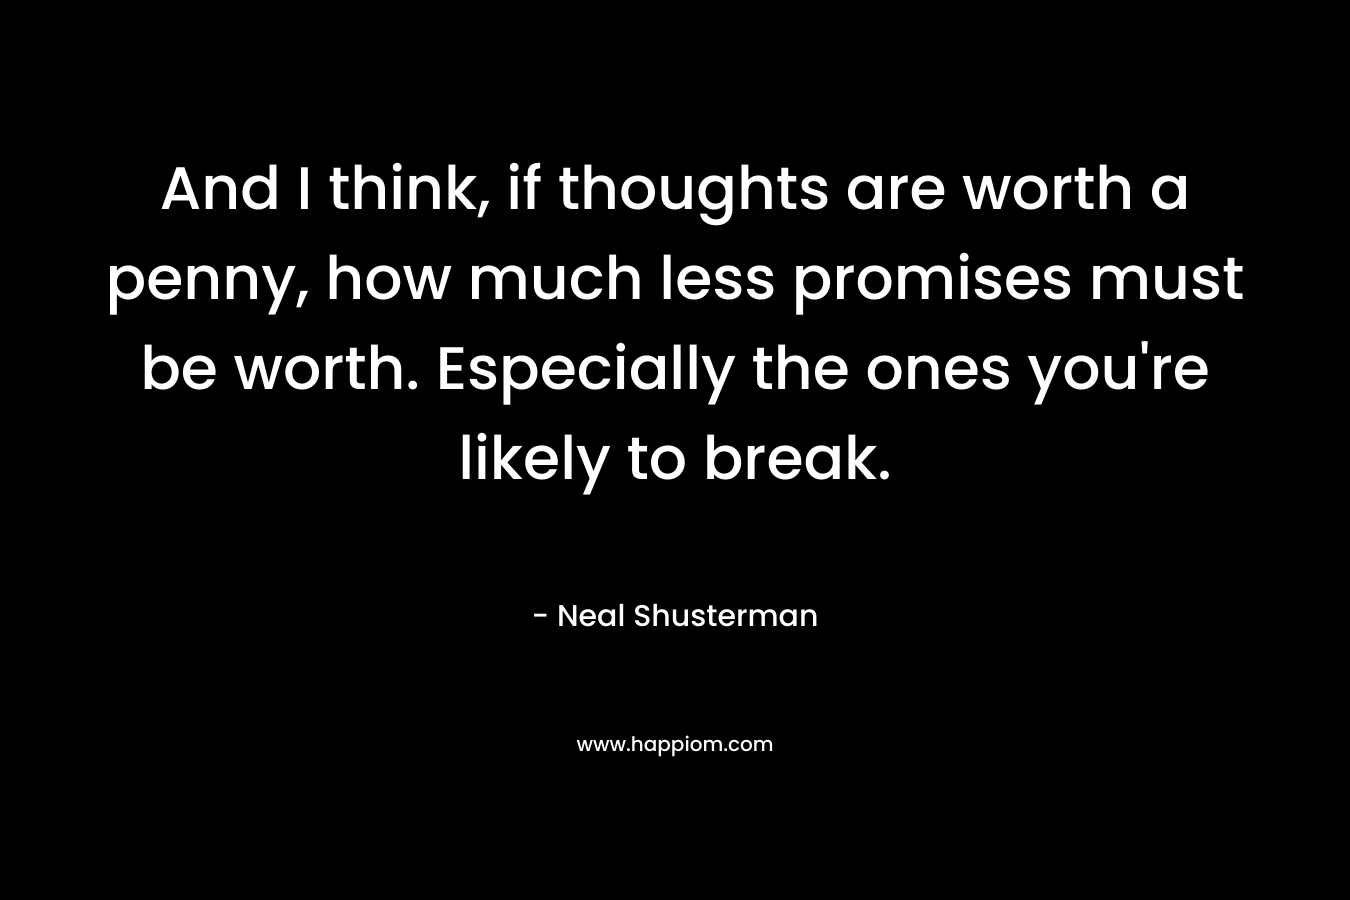 And I think, if thoughts are worth a penny, how much less promises must be worth. Especially the ones you’re likely to break. – Neal Shusterman